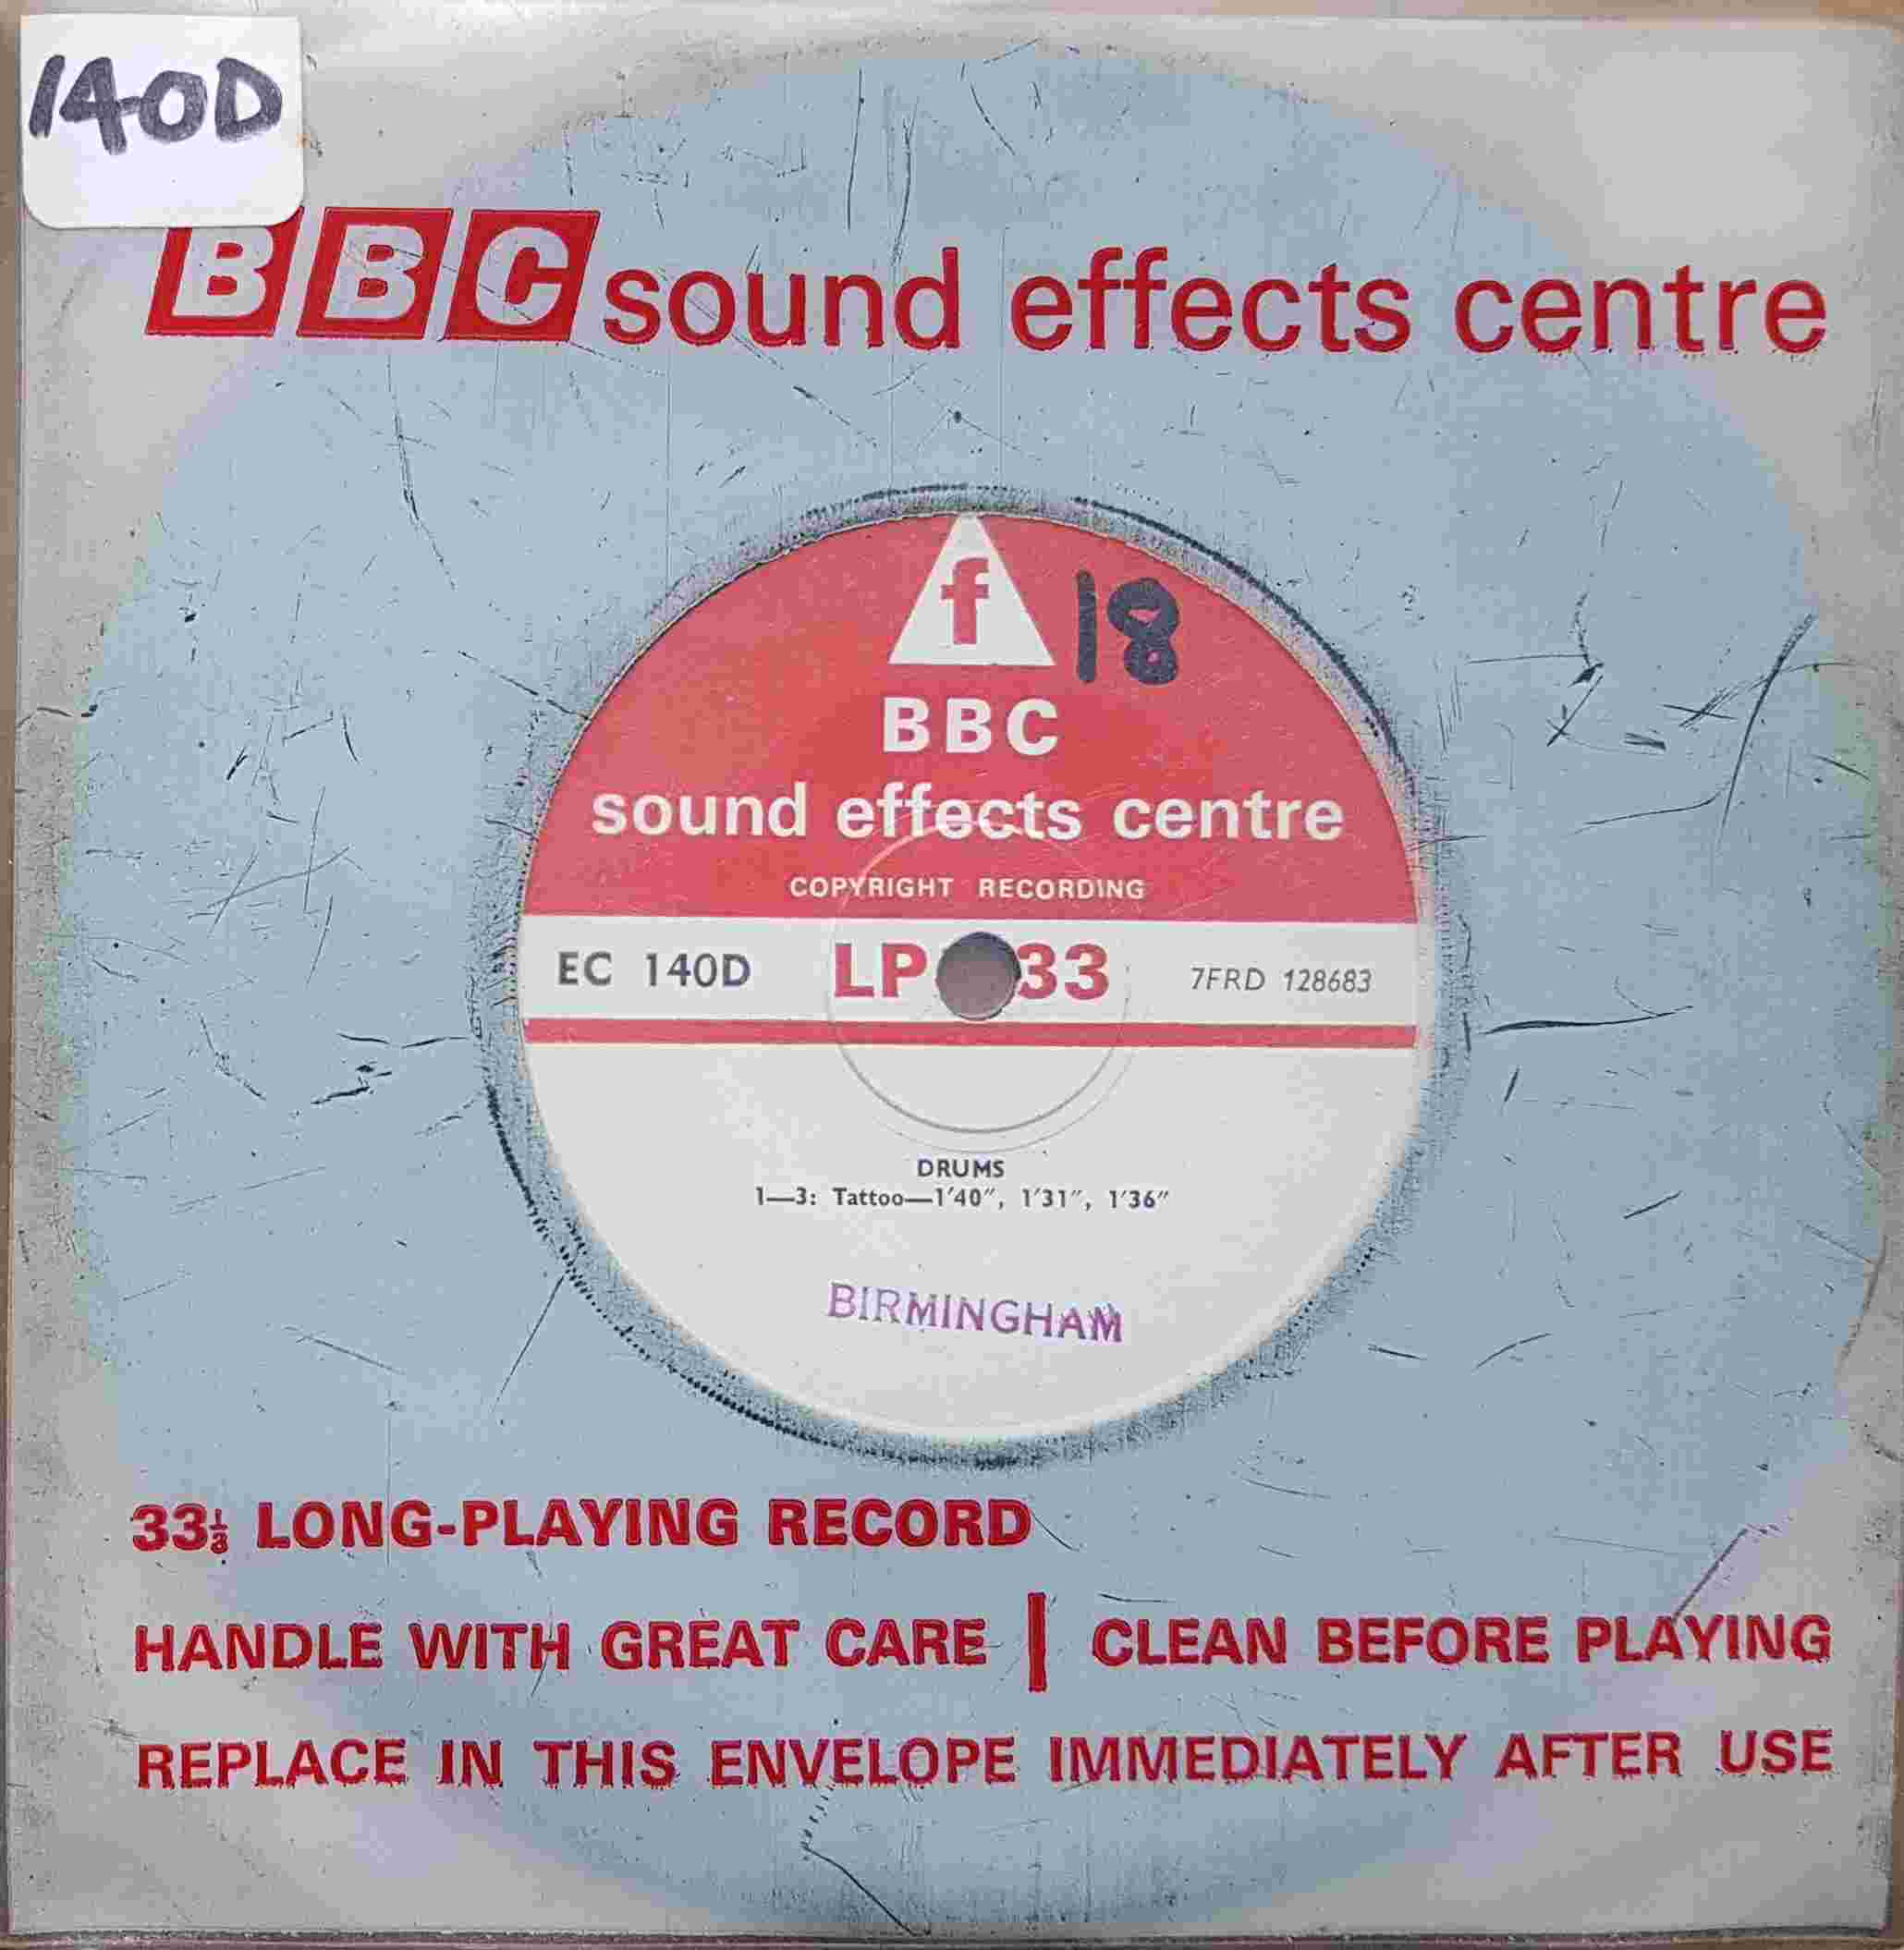 Picture of EC 140D Drums by artist Not registered from the BBC singles - Records and Tapes library